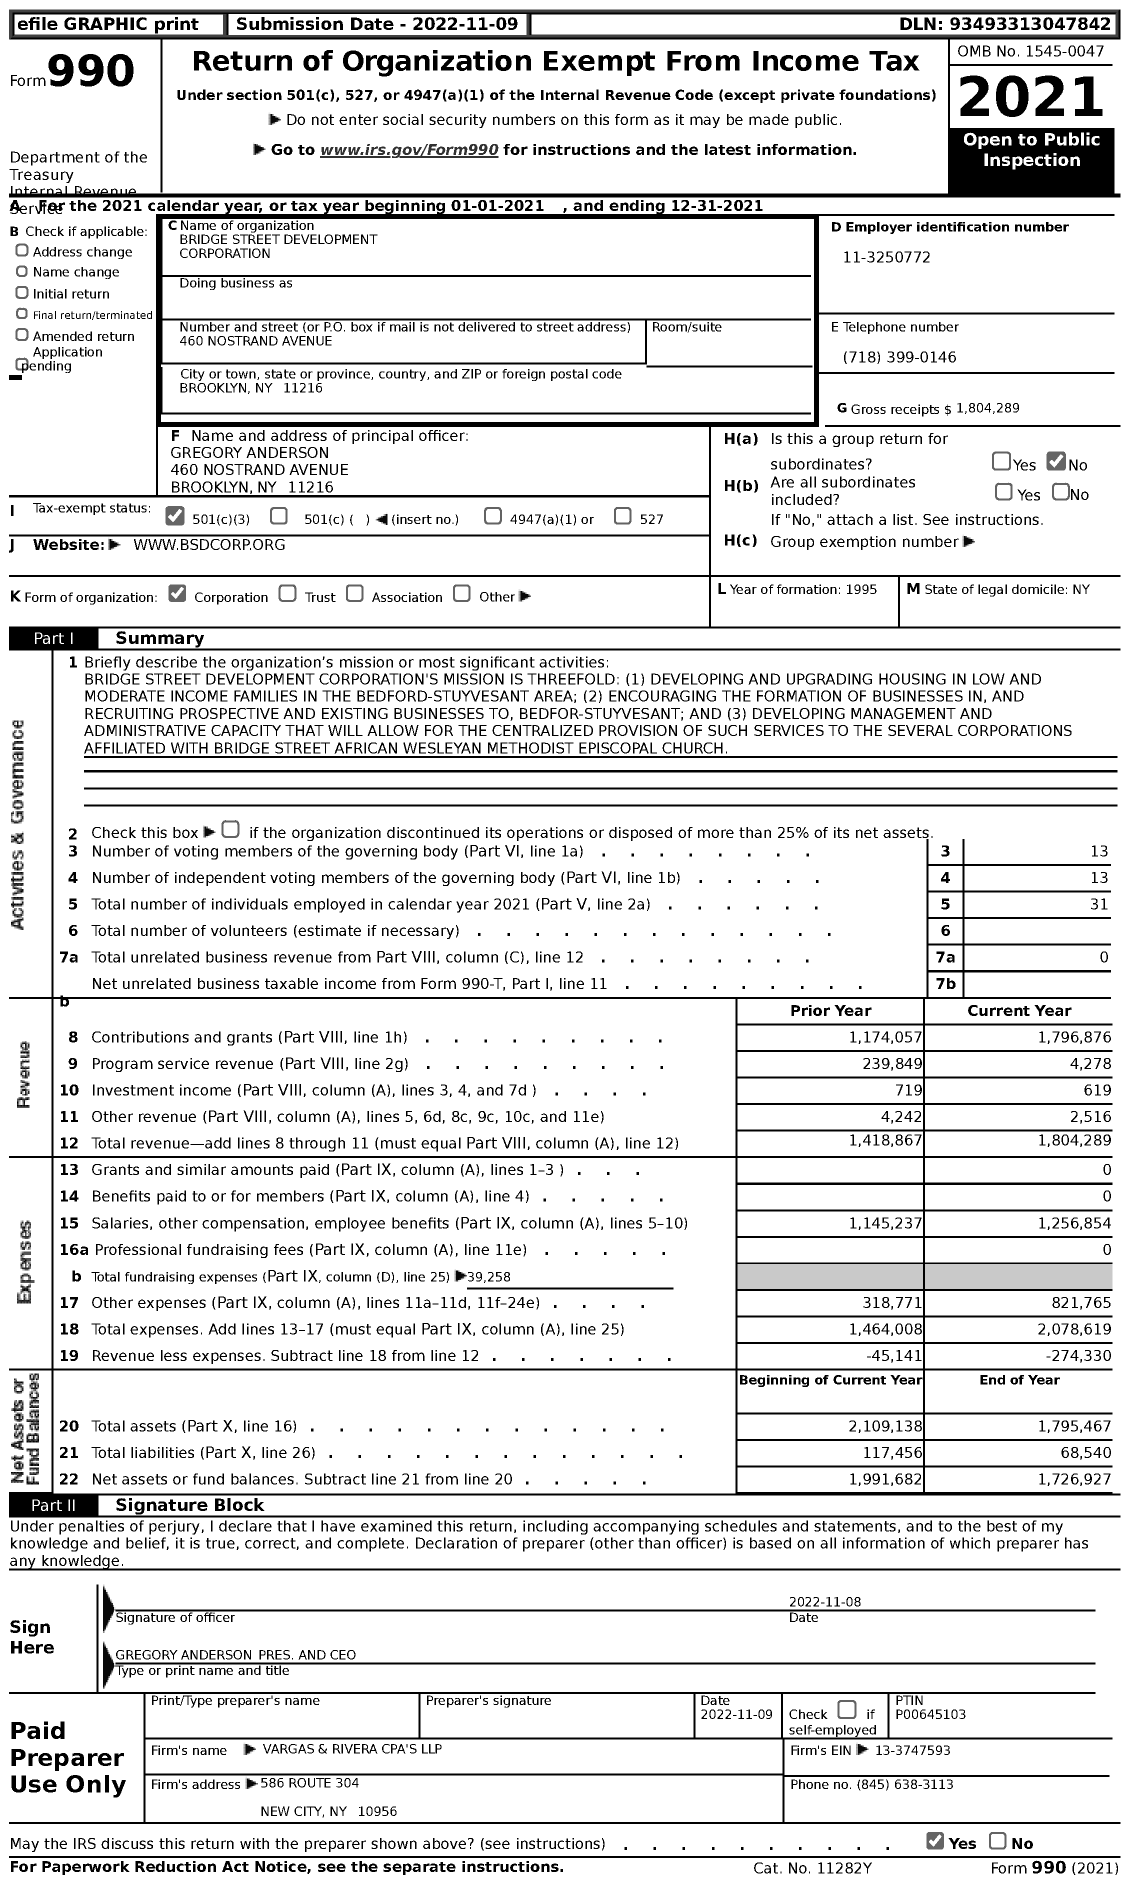 Image of first page of 2021 Form 990 for Bridge Street Development Corporation (BSDC)